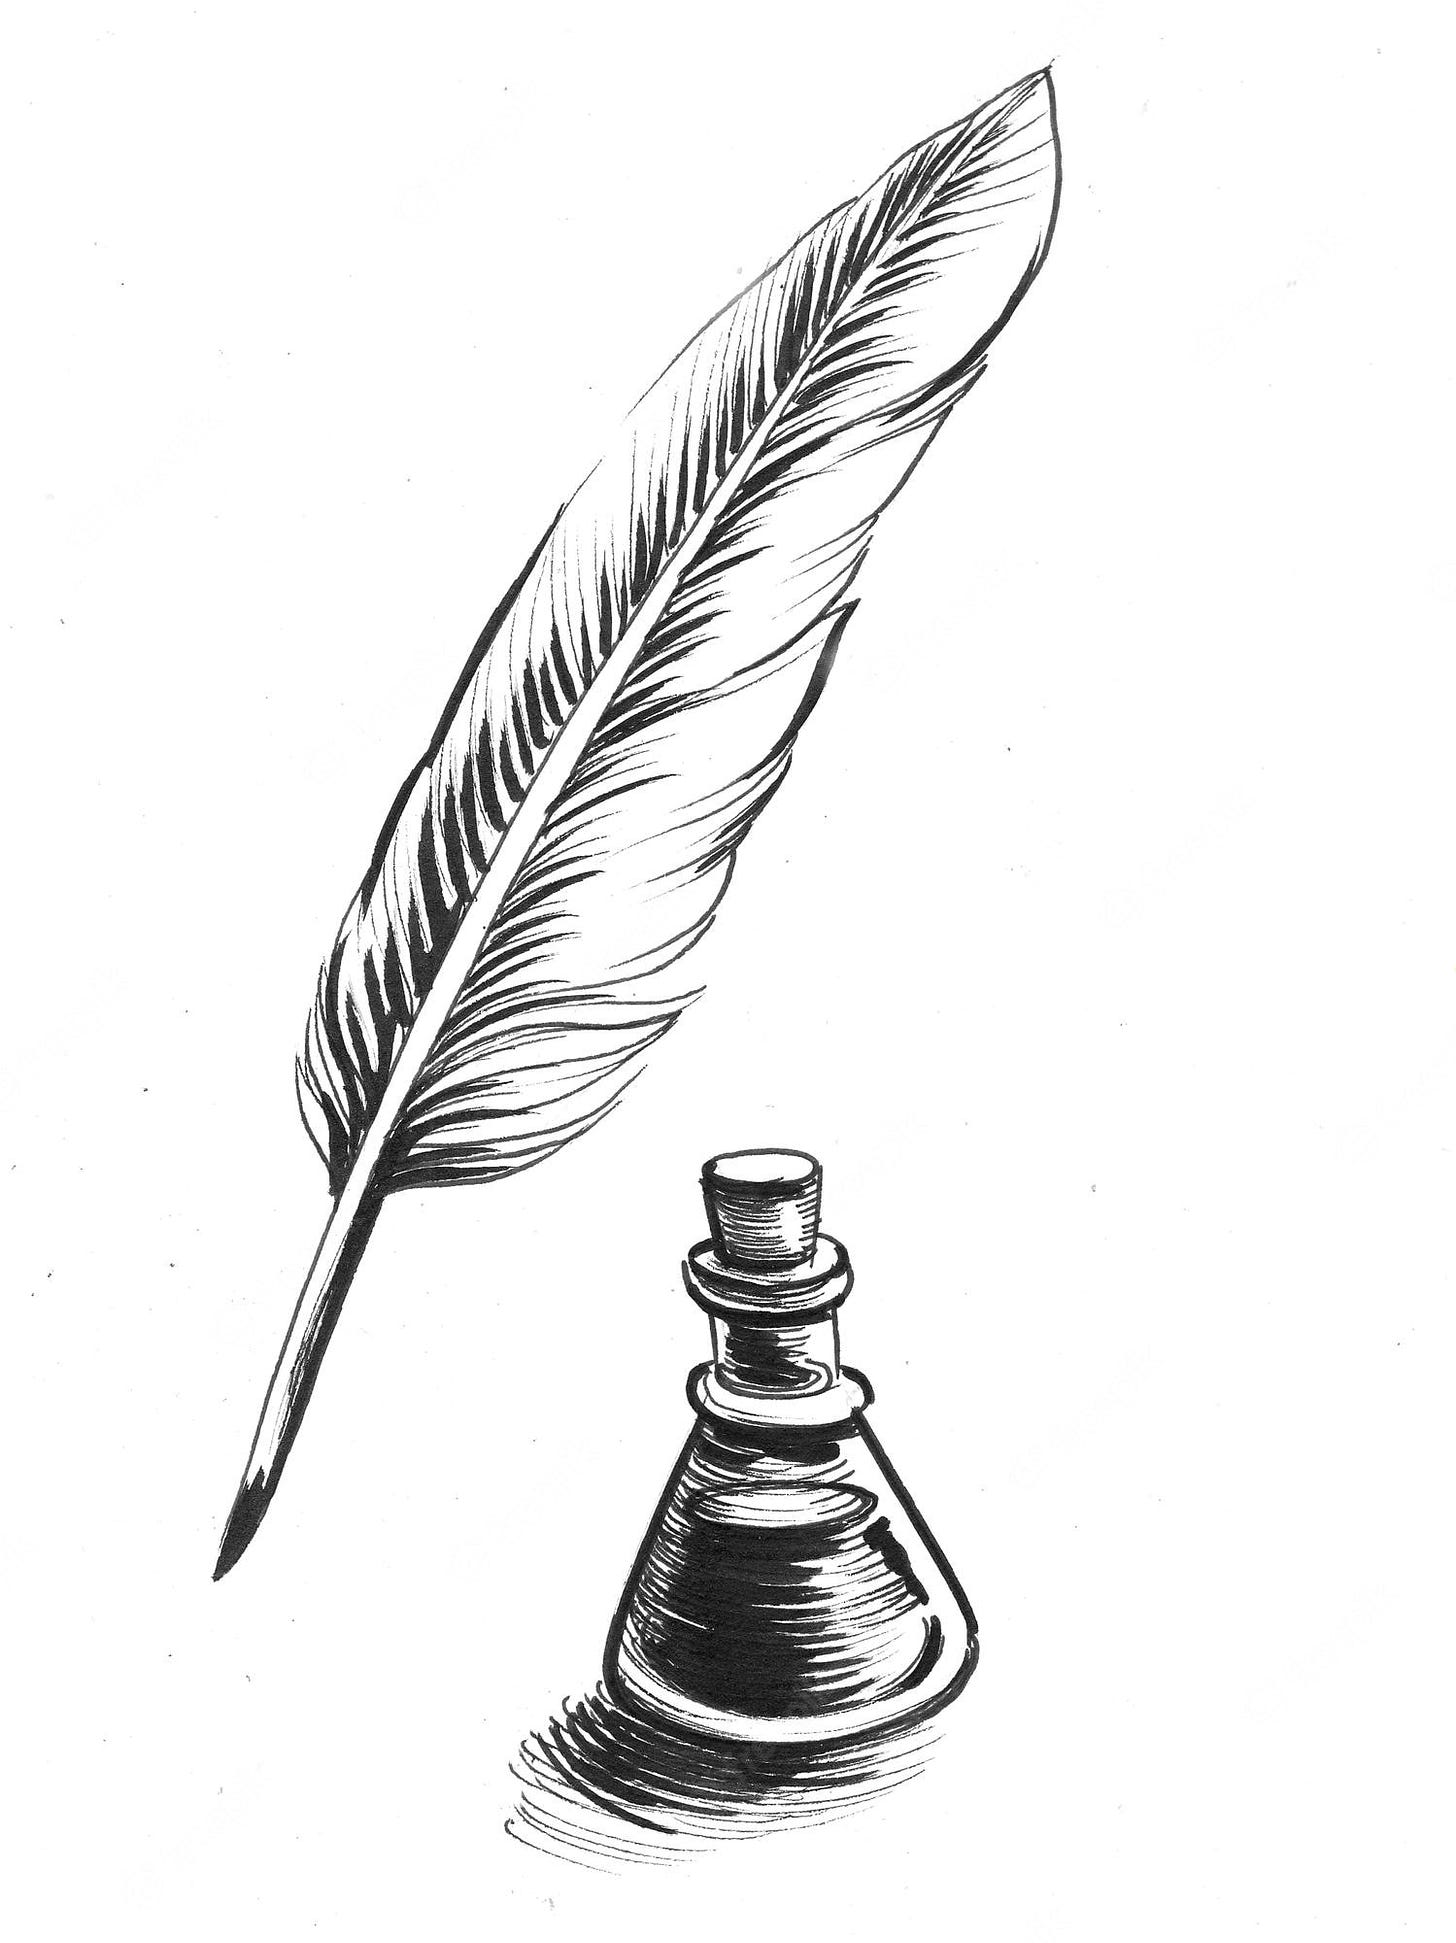 Quill Drawing Images - Free Download on Freepik